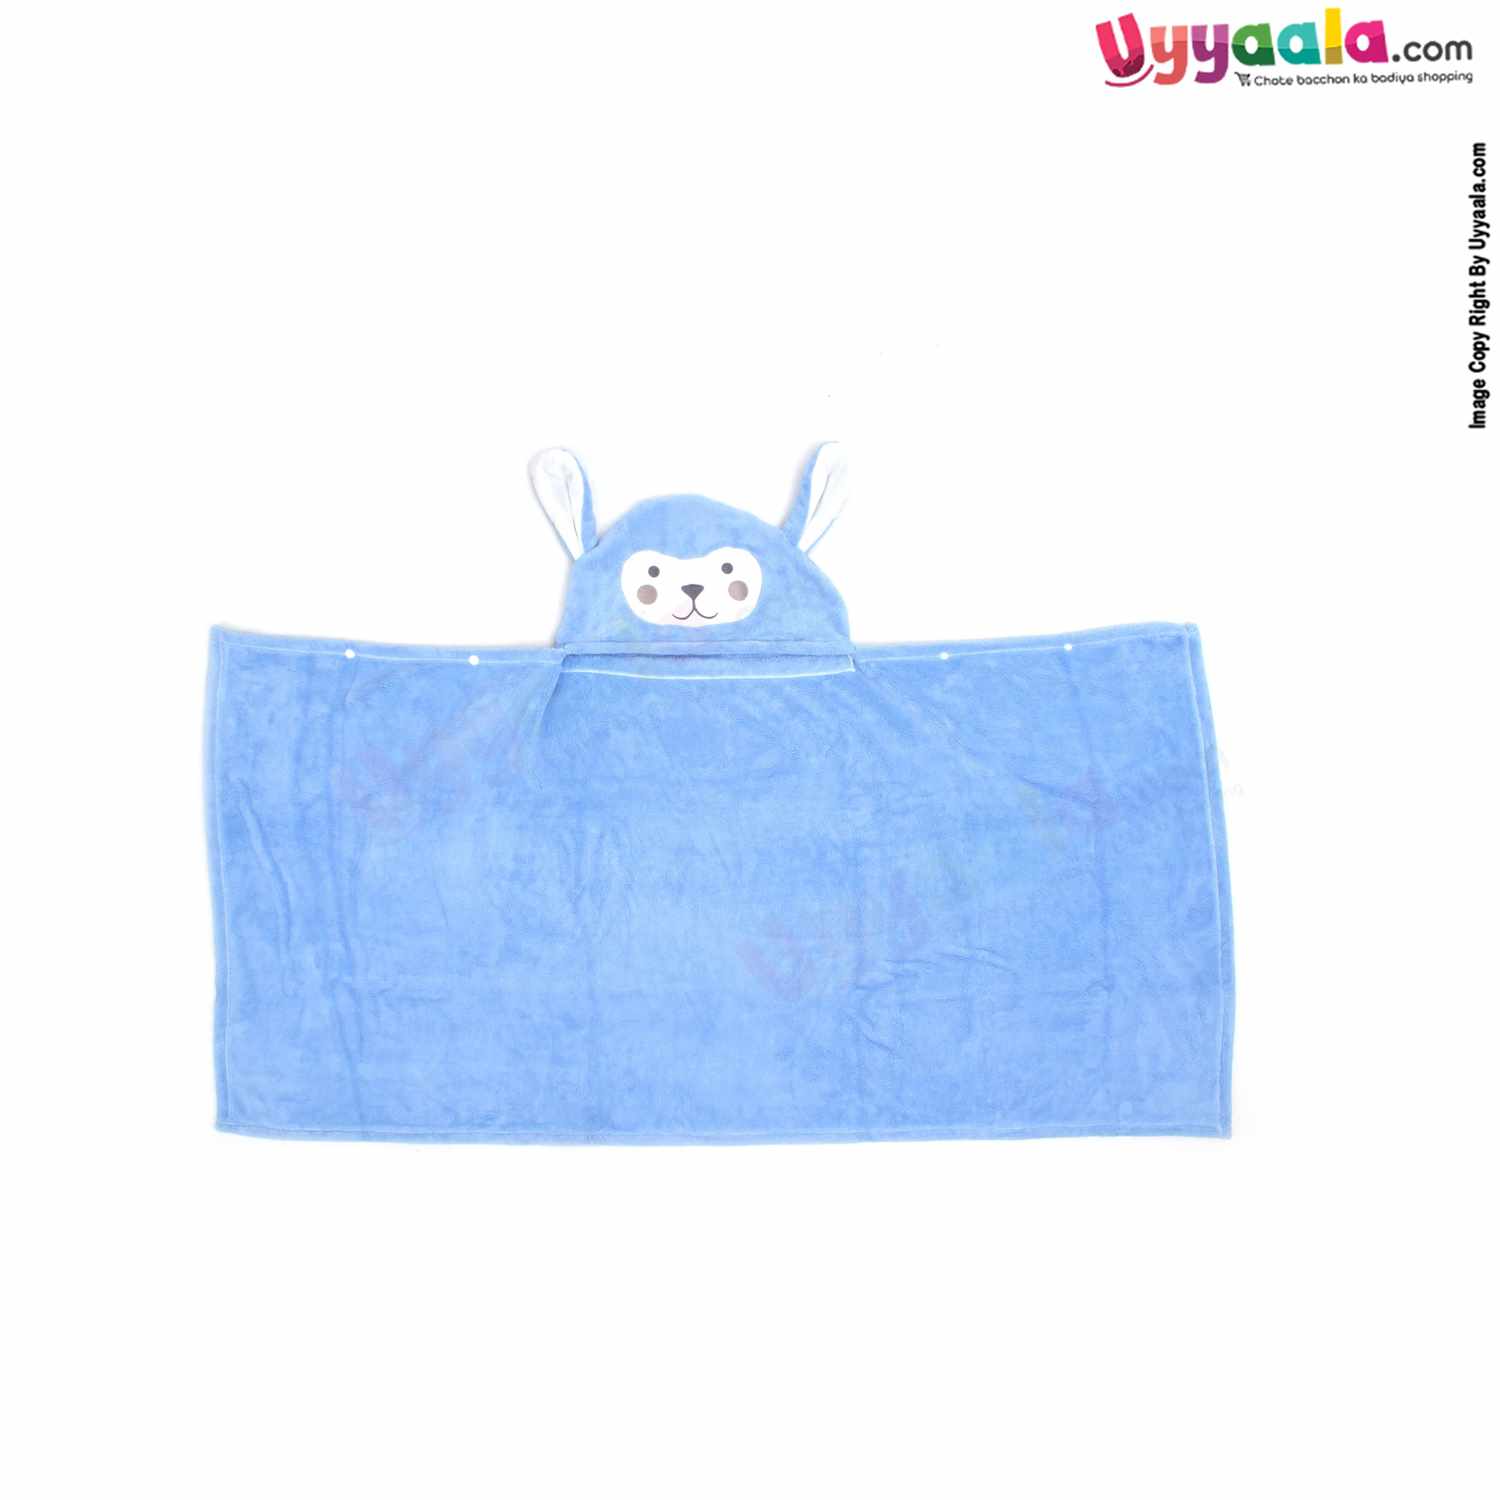 Hooded Fur Blanket with Cartoon Character for Babies 0-36m Age, Size(137*71cm)  - Blue